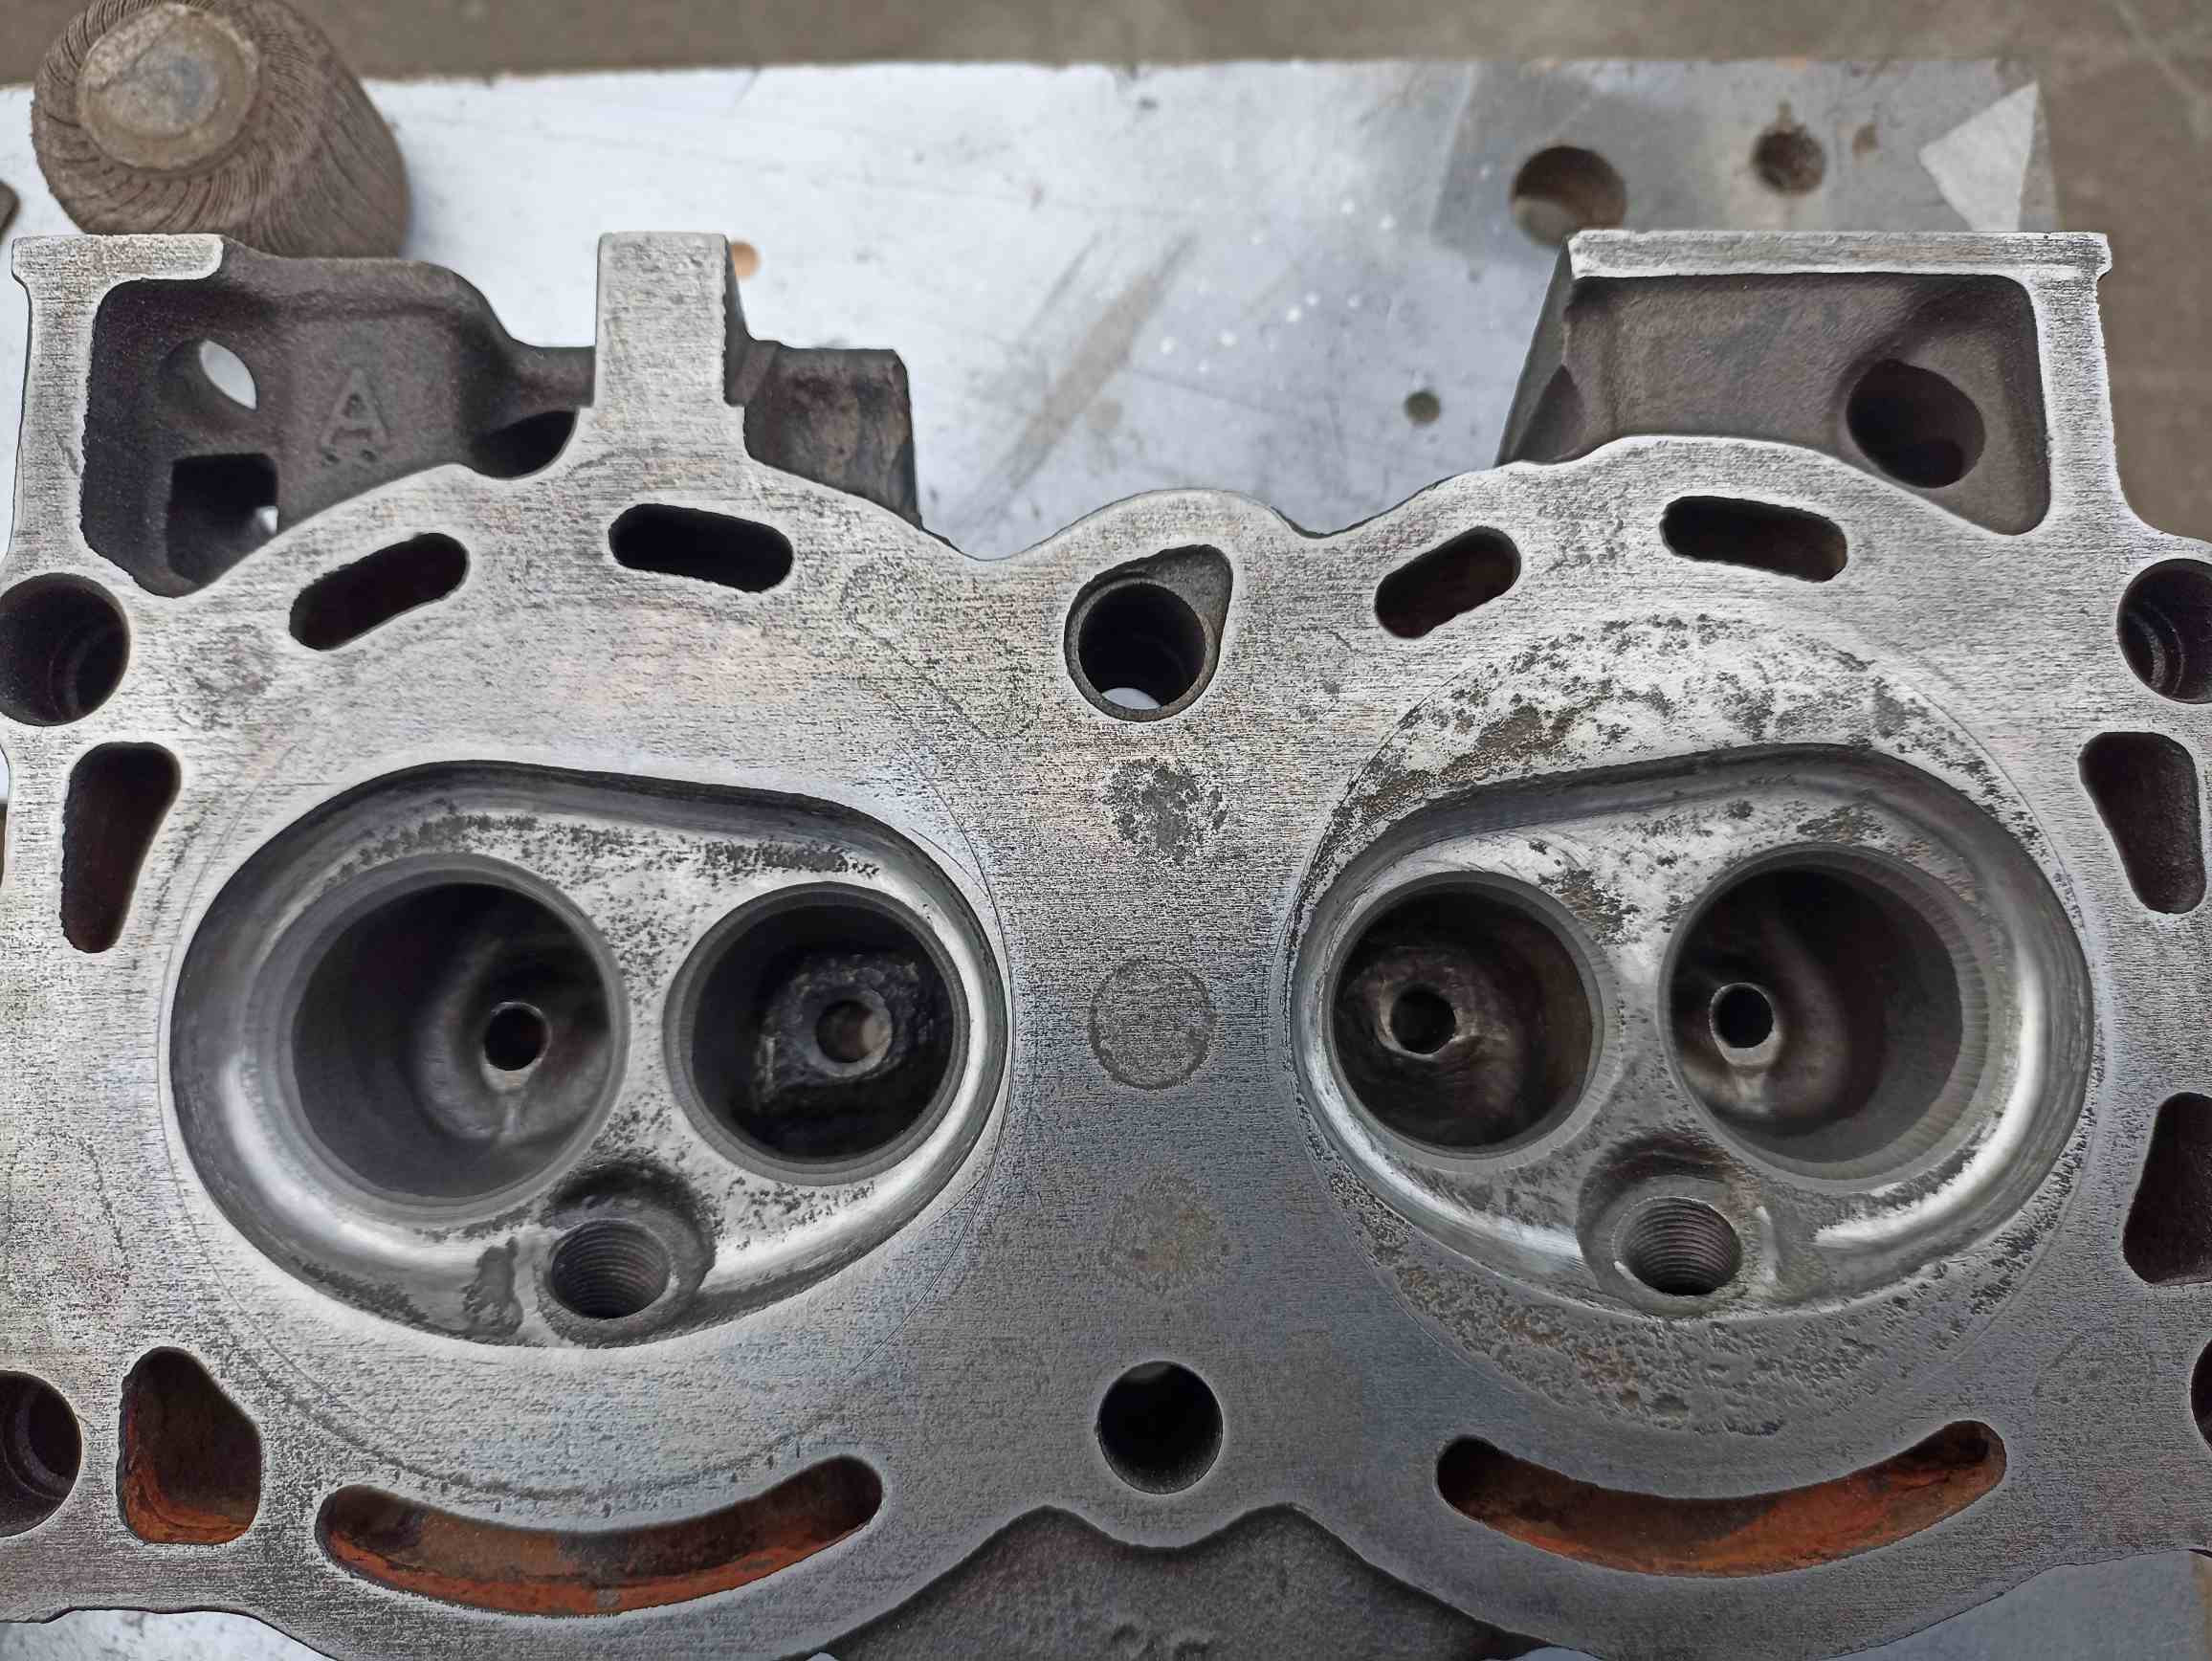 combustion chamber after grinding polishing.jpg